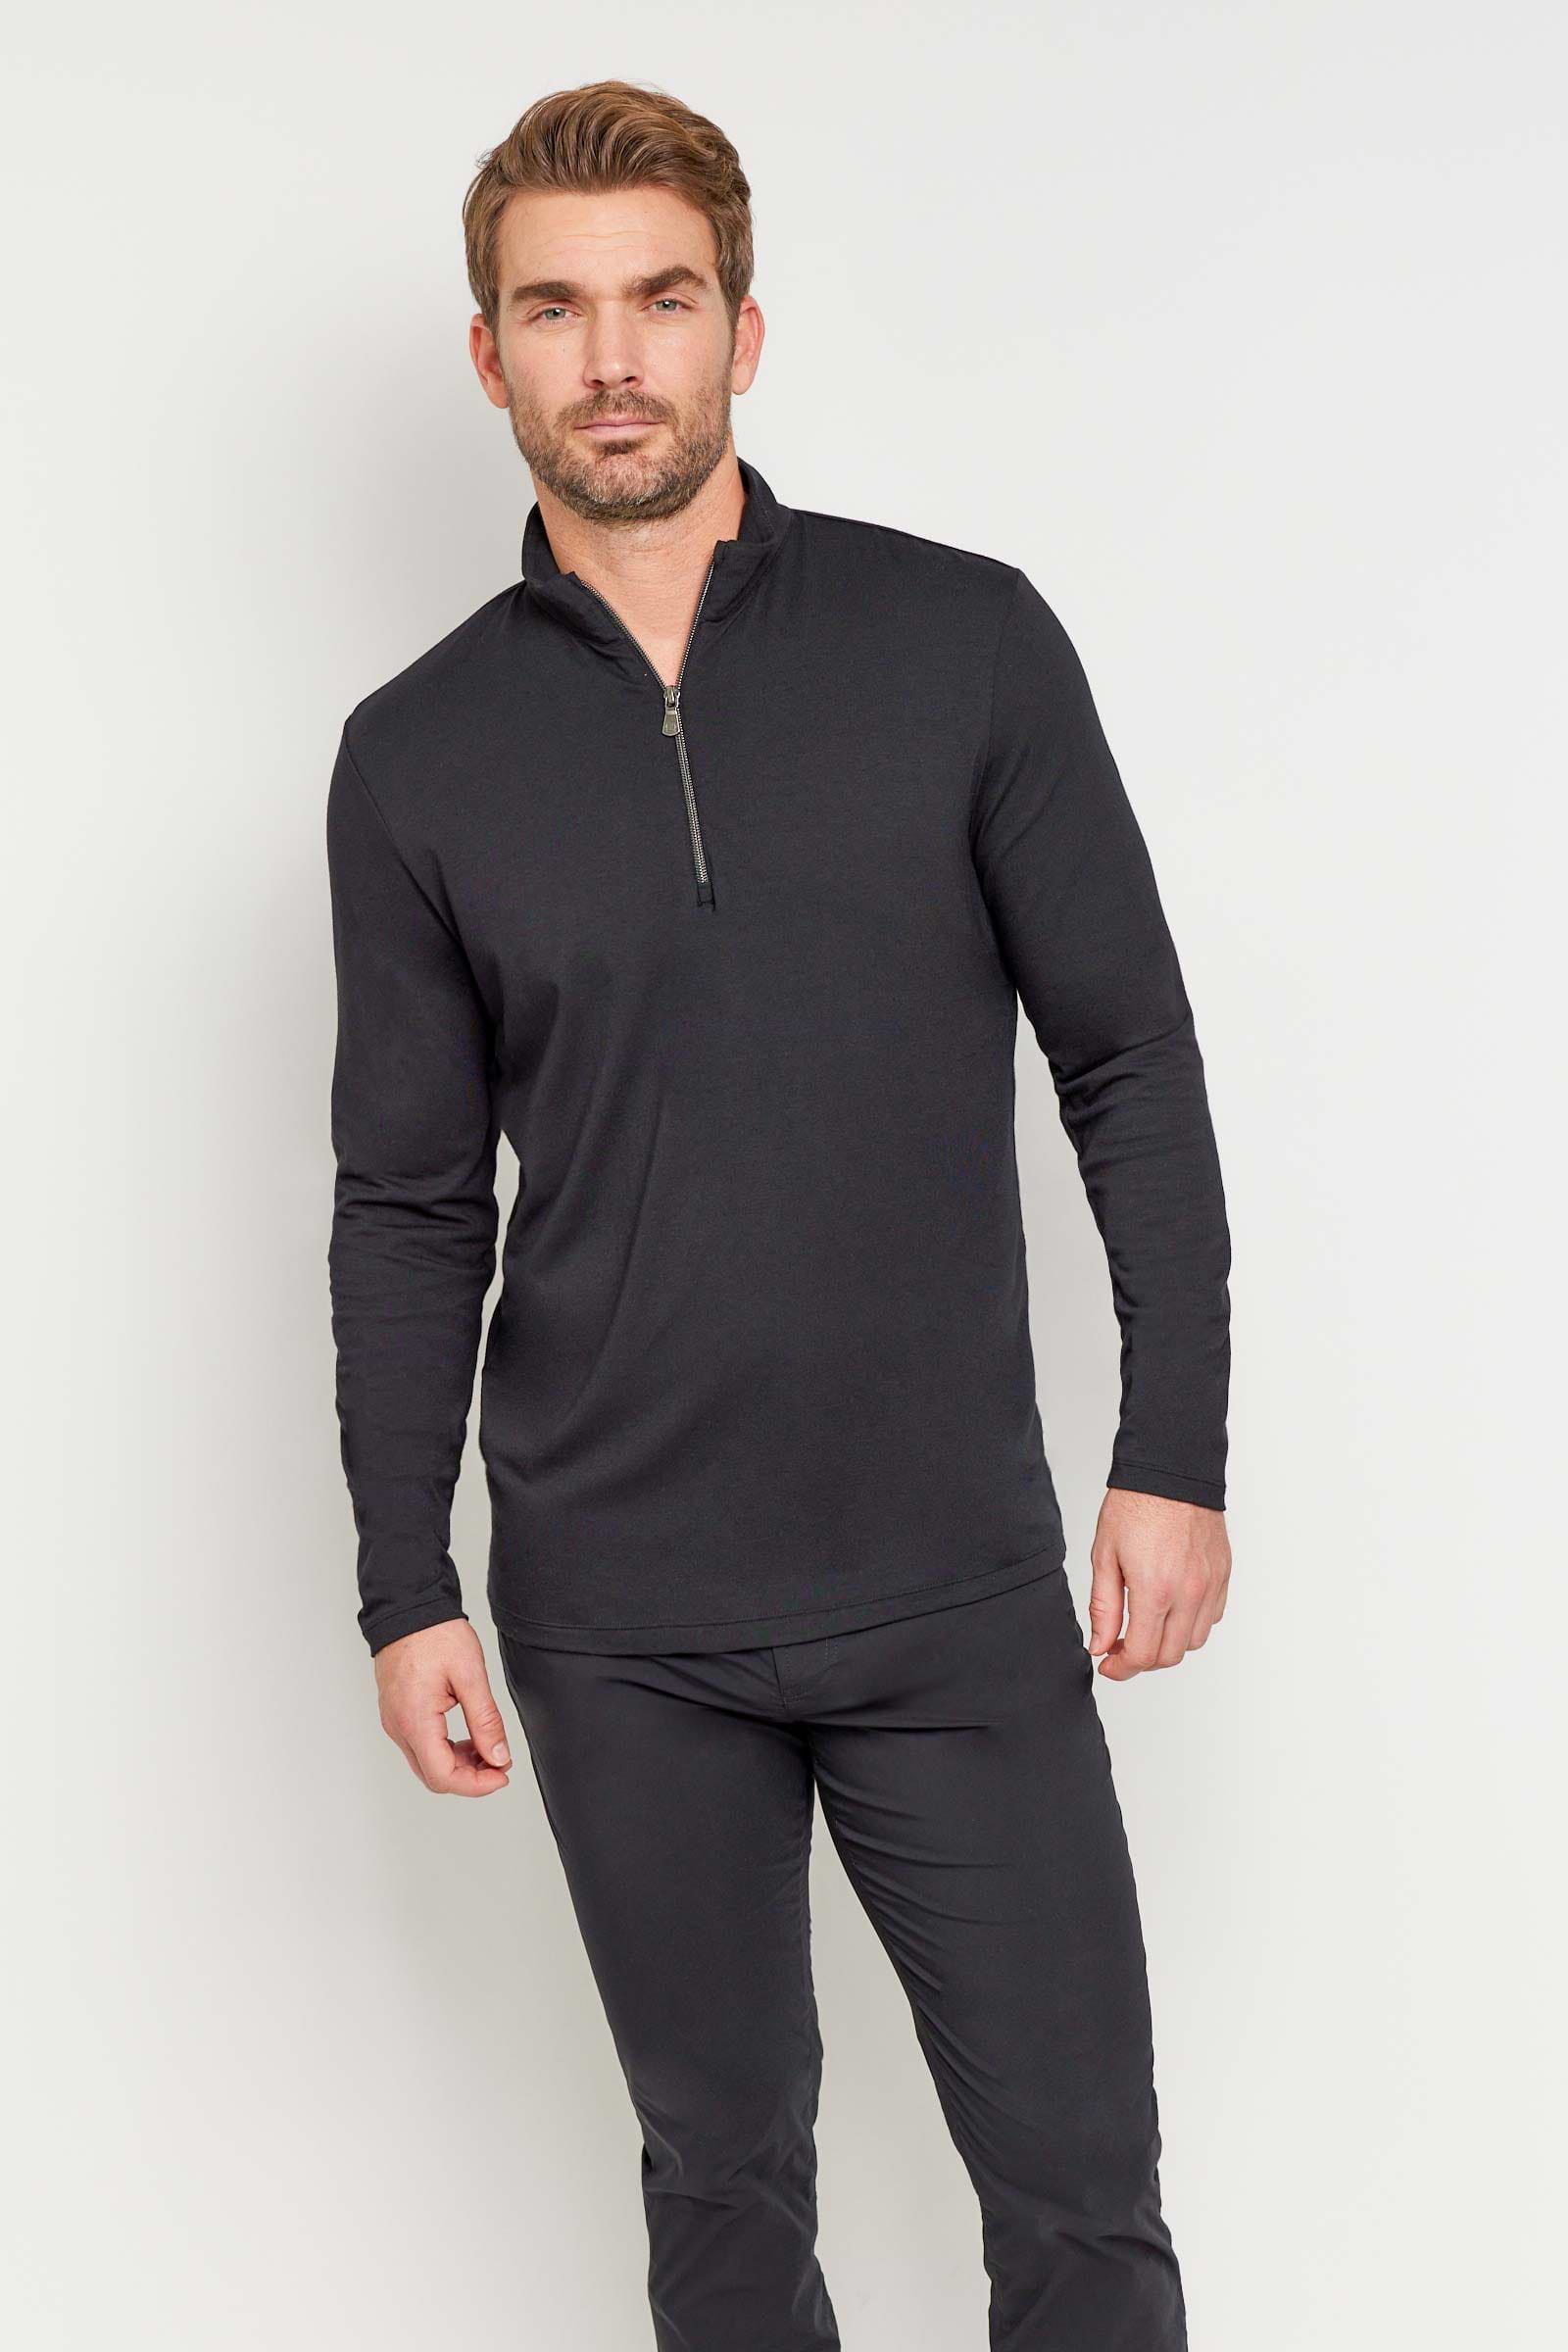 The Best Travel Top. Man Showing the Front Profile of a Men's Charlie Top in Black.